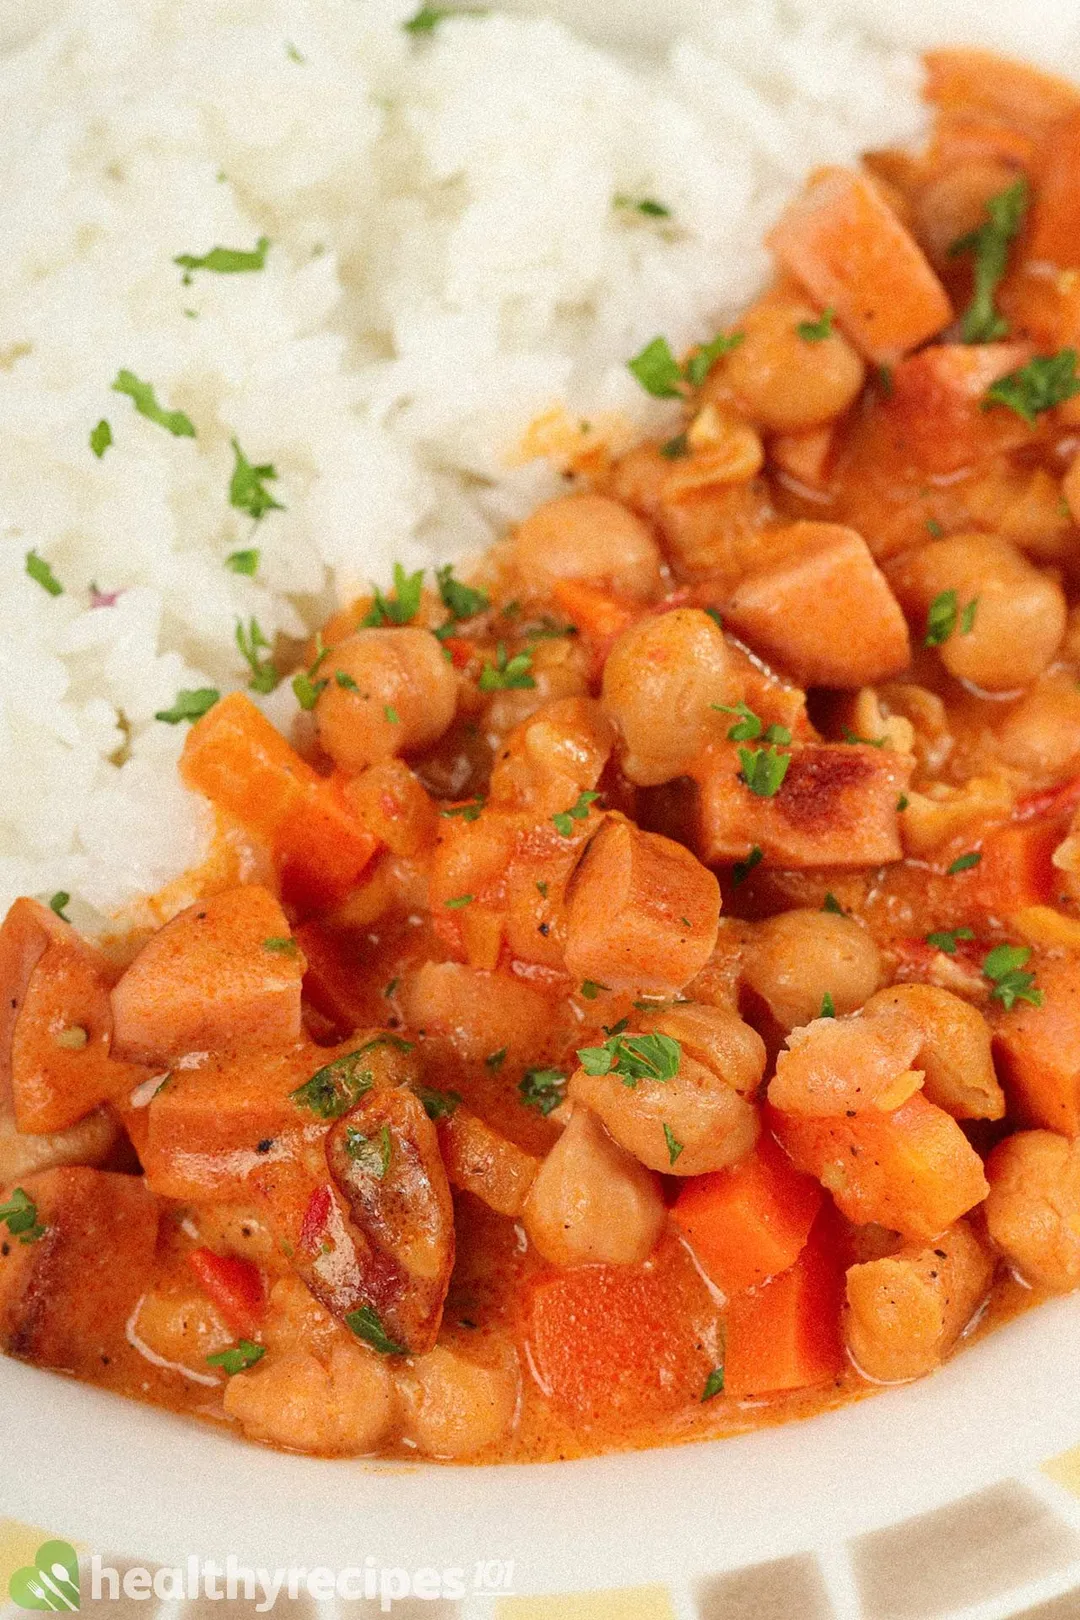 A close-up shot on a plate of food filled with chickpea stew and white rice.